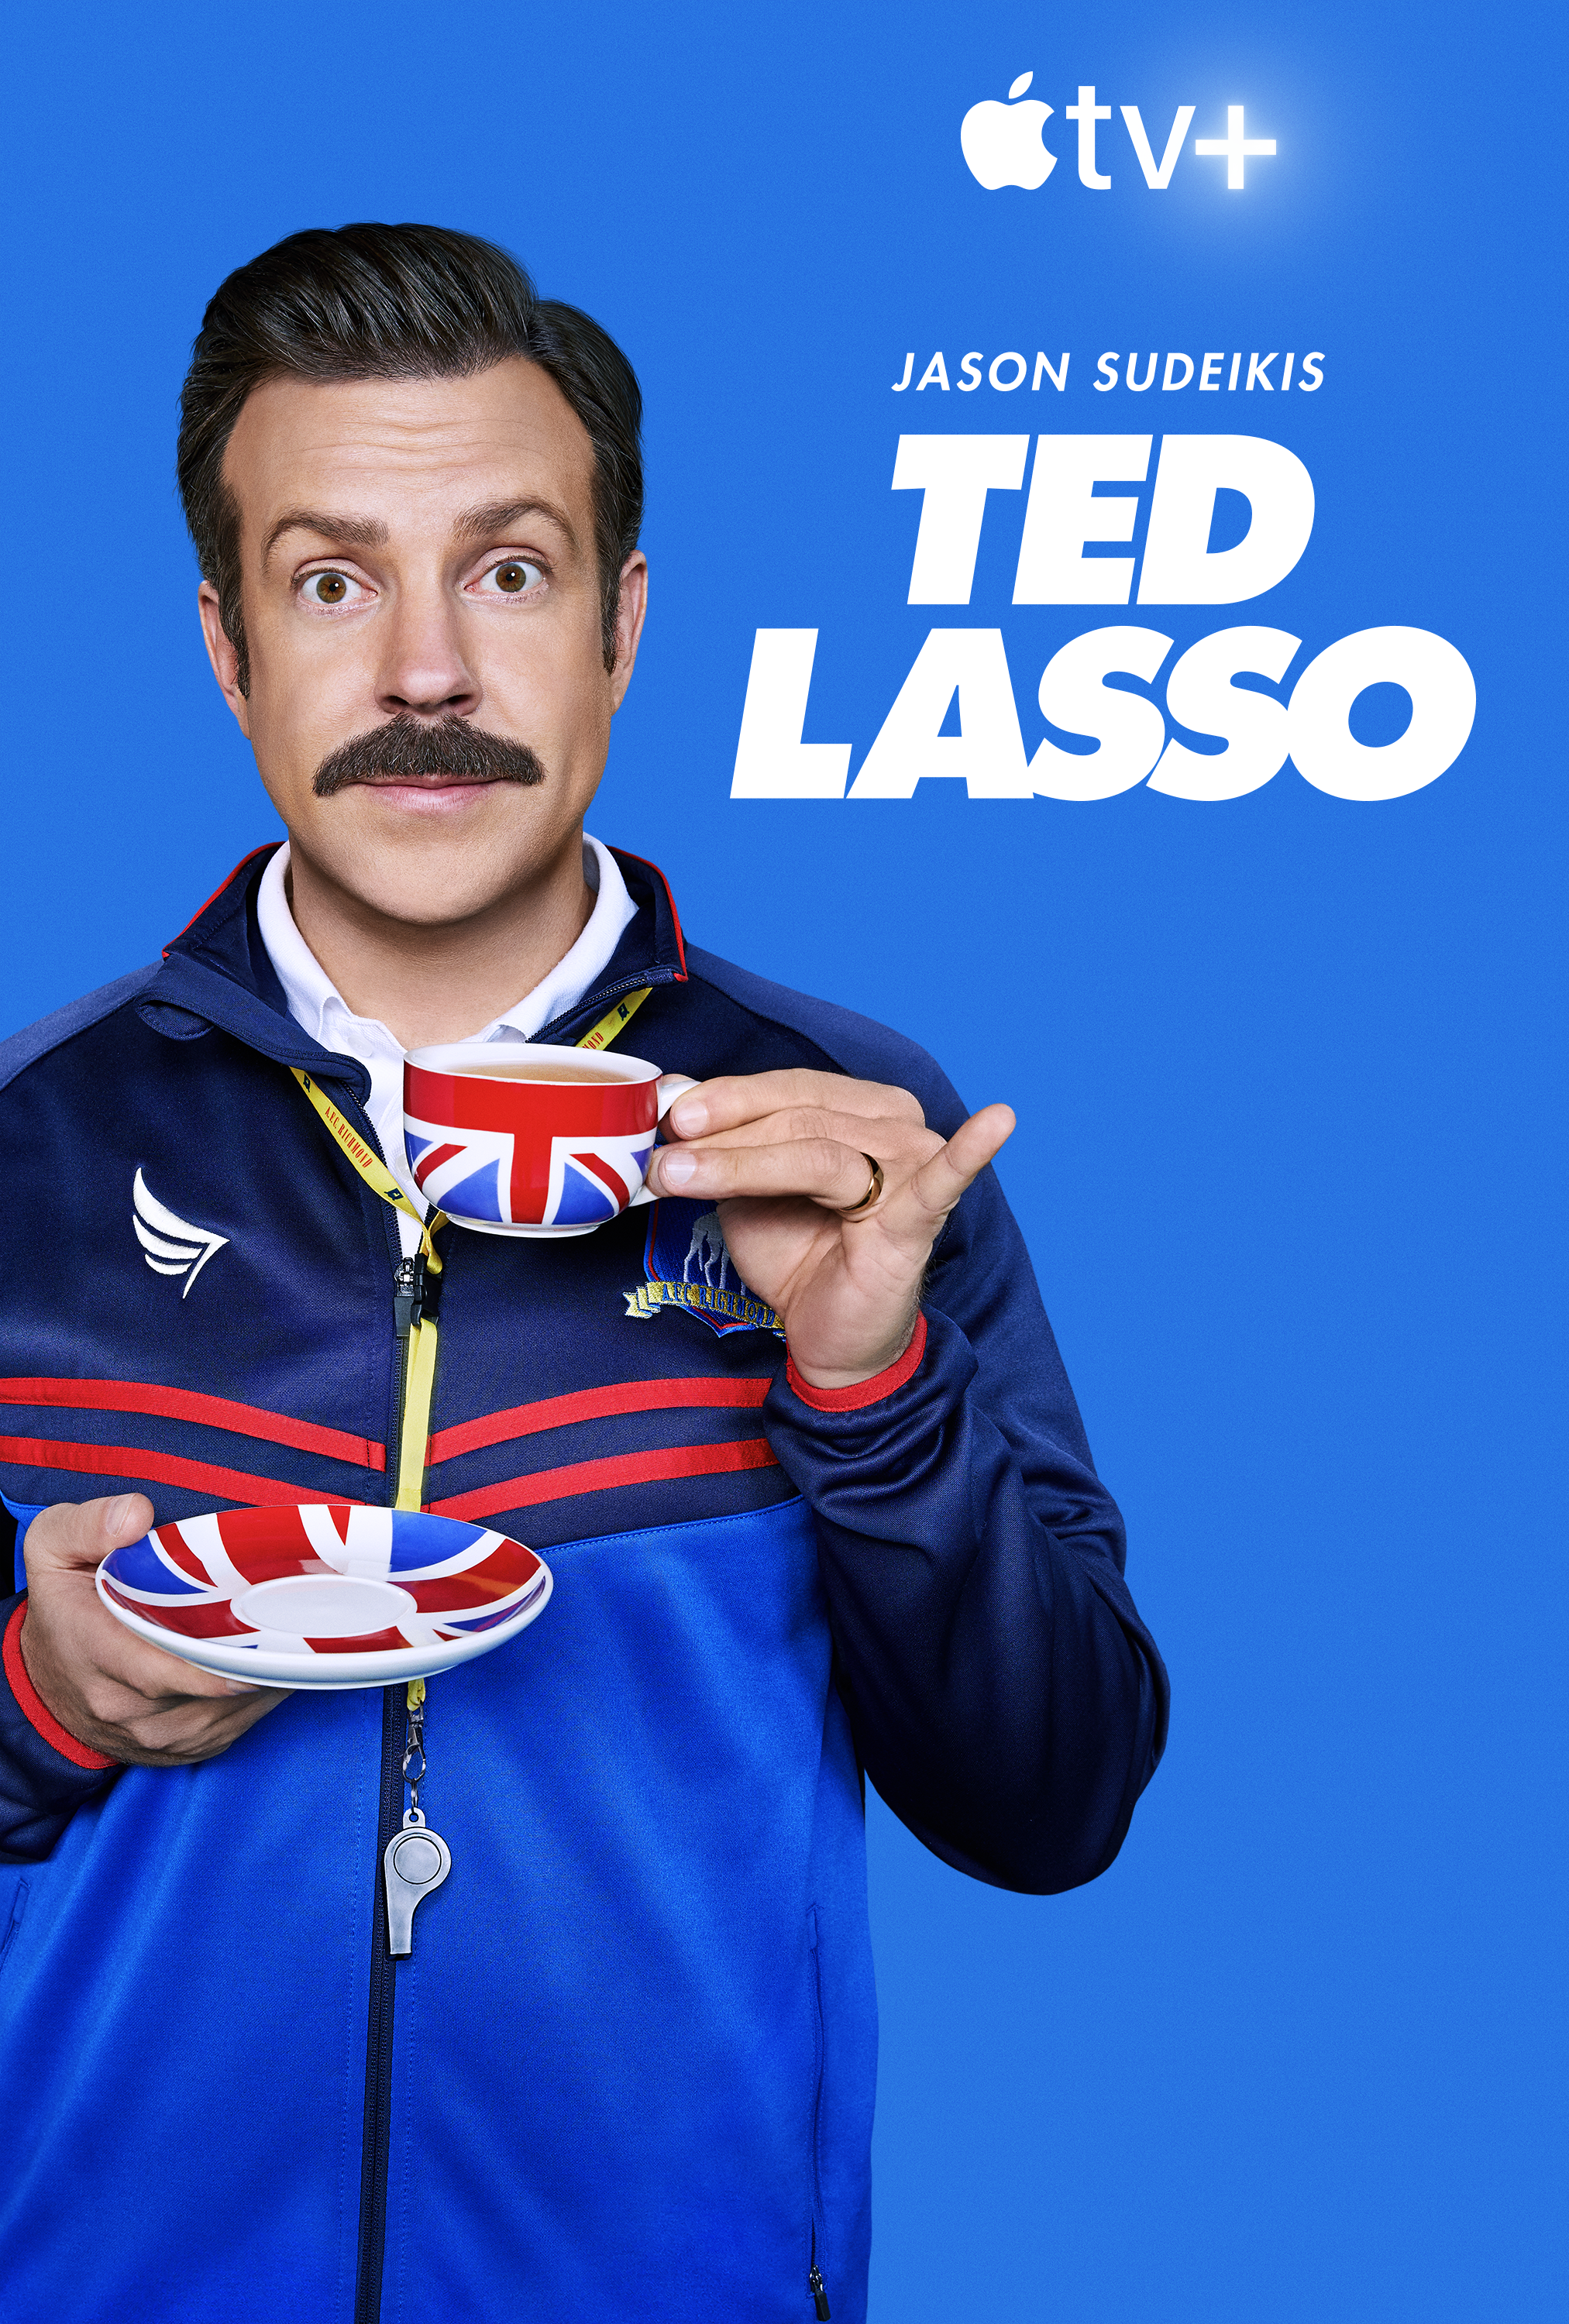 Lasso ted